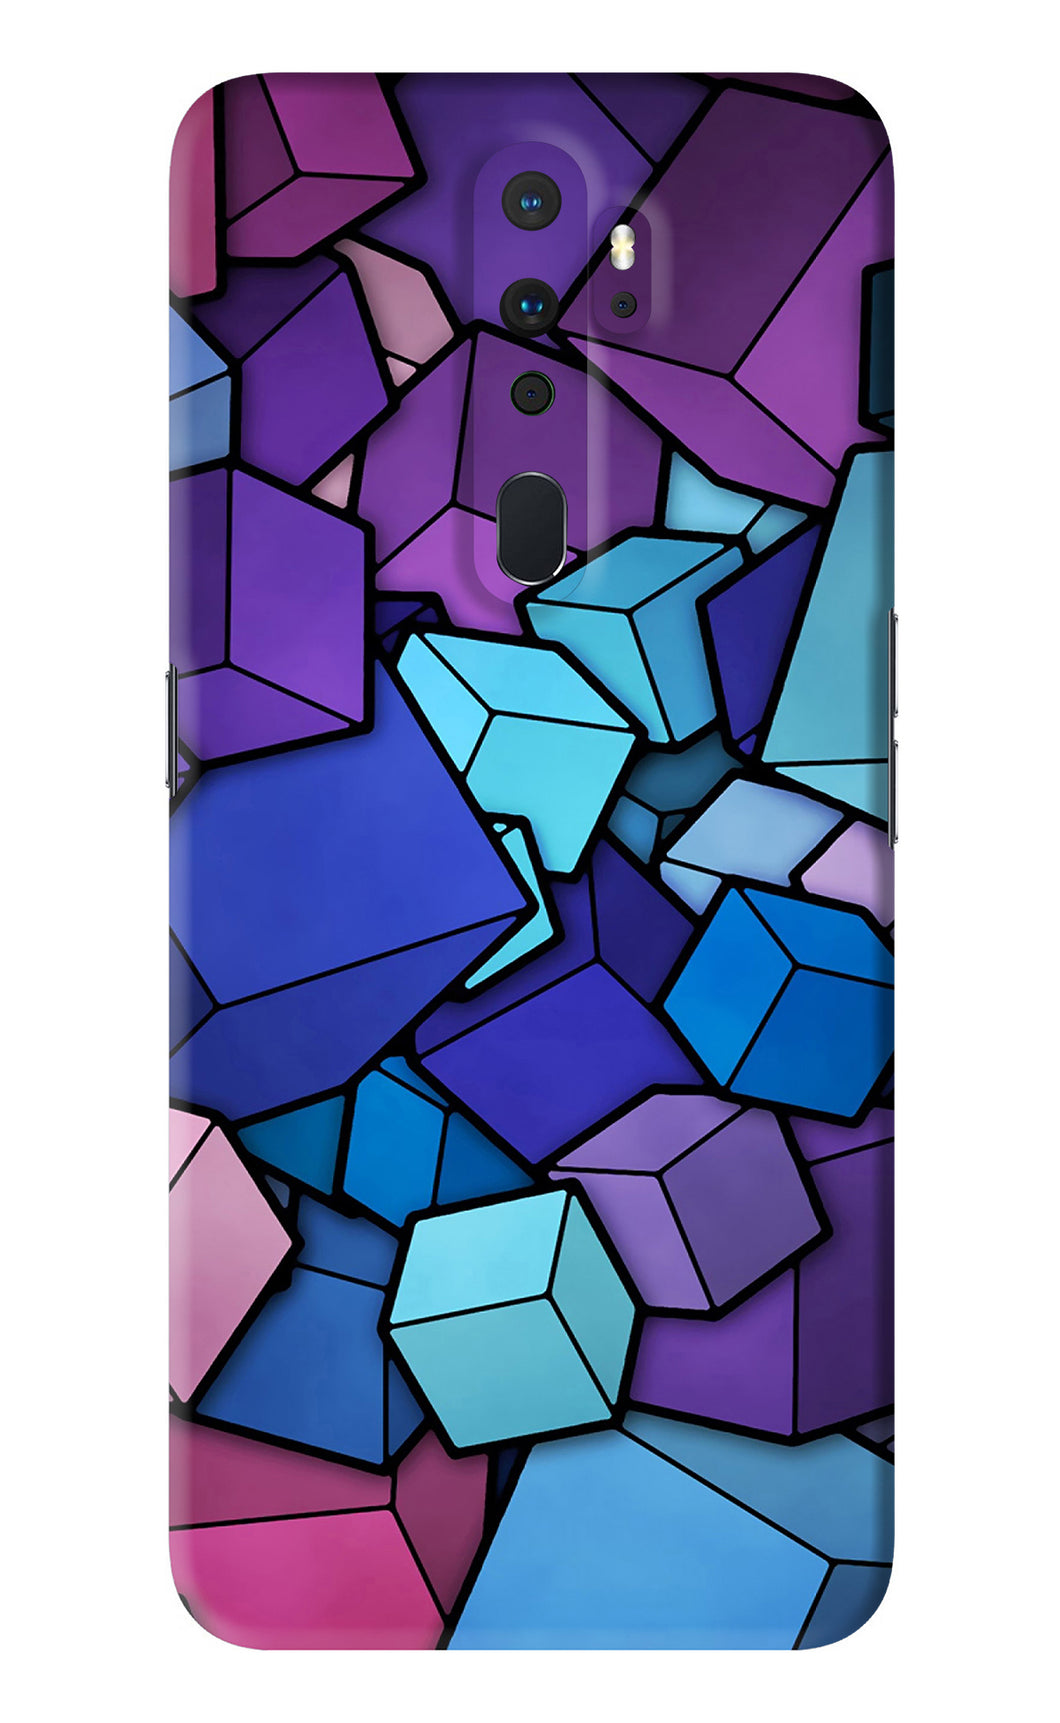 Cubic Abstract Oppo A9 2020 Back Skin Wrap